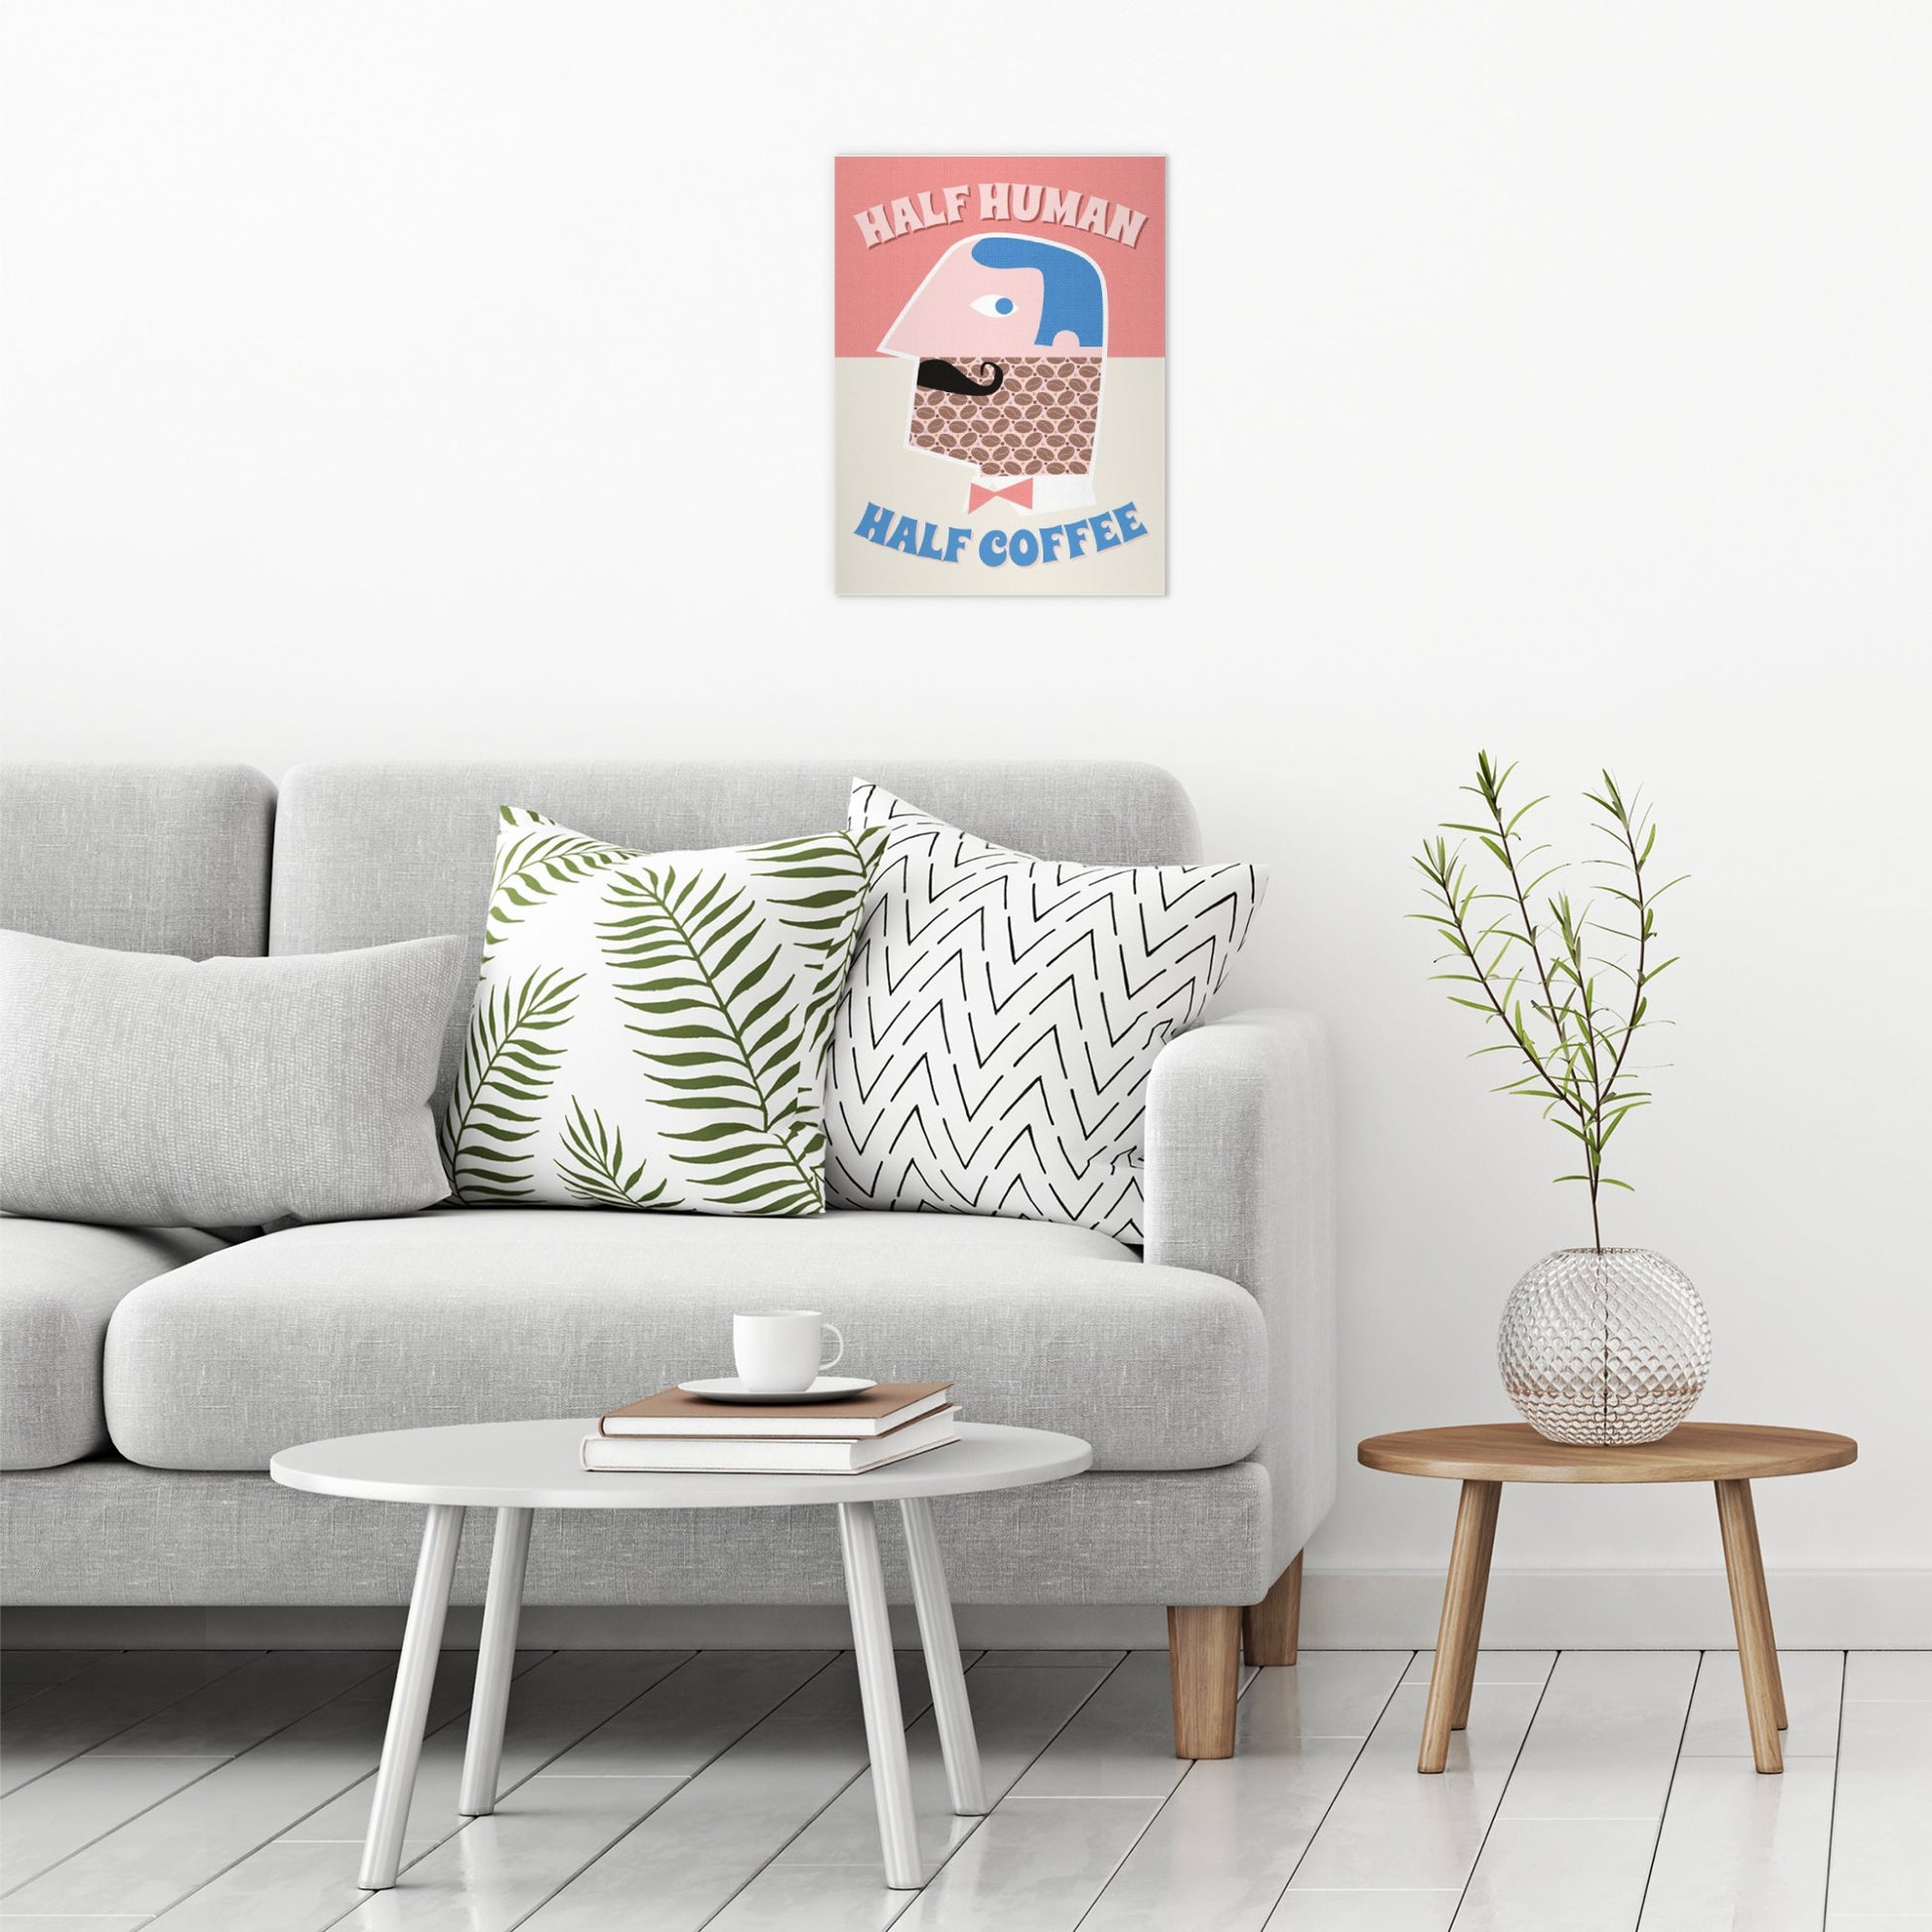 A contemporary modern room view showing a medium size metal art poster display plate with printed design of a Half Human Half Coffee' Fun Retro Quote